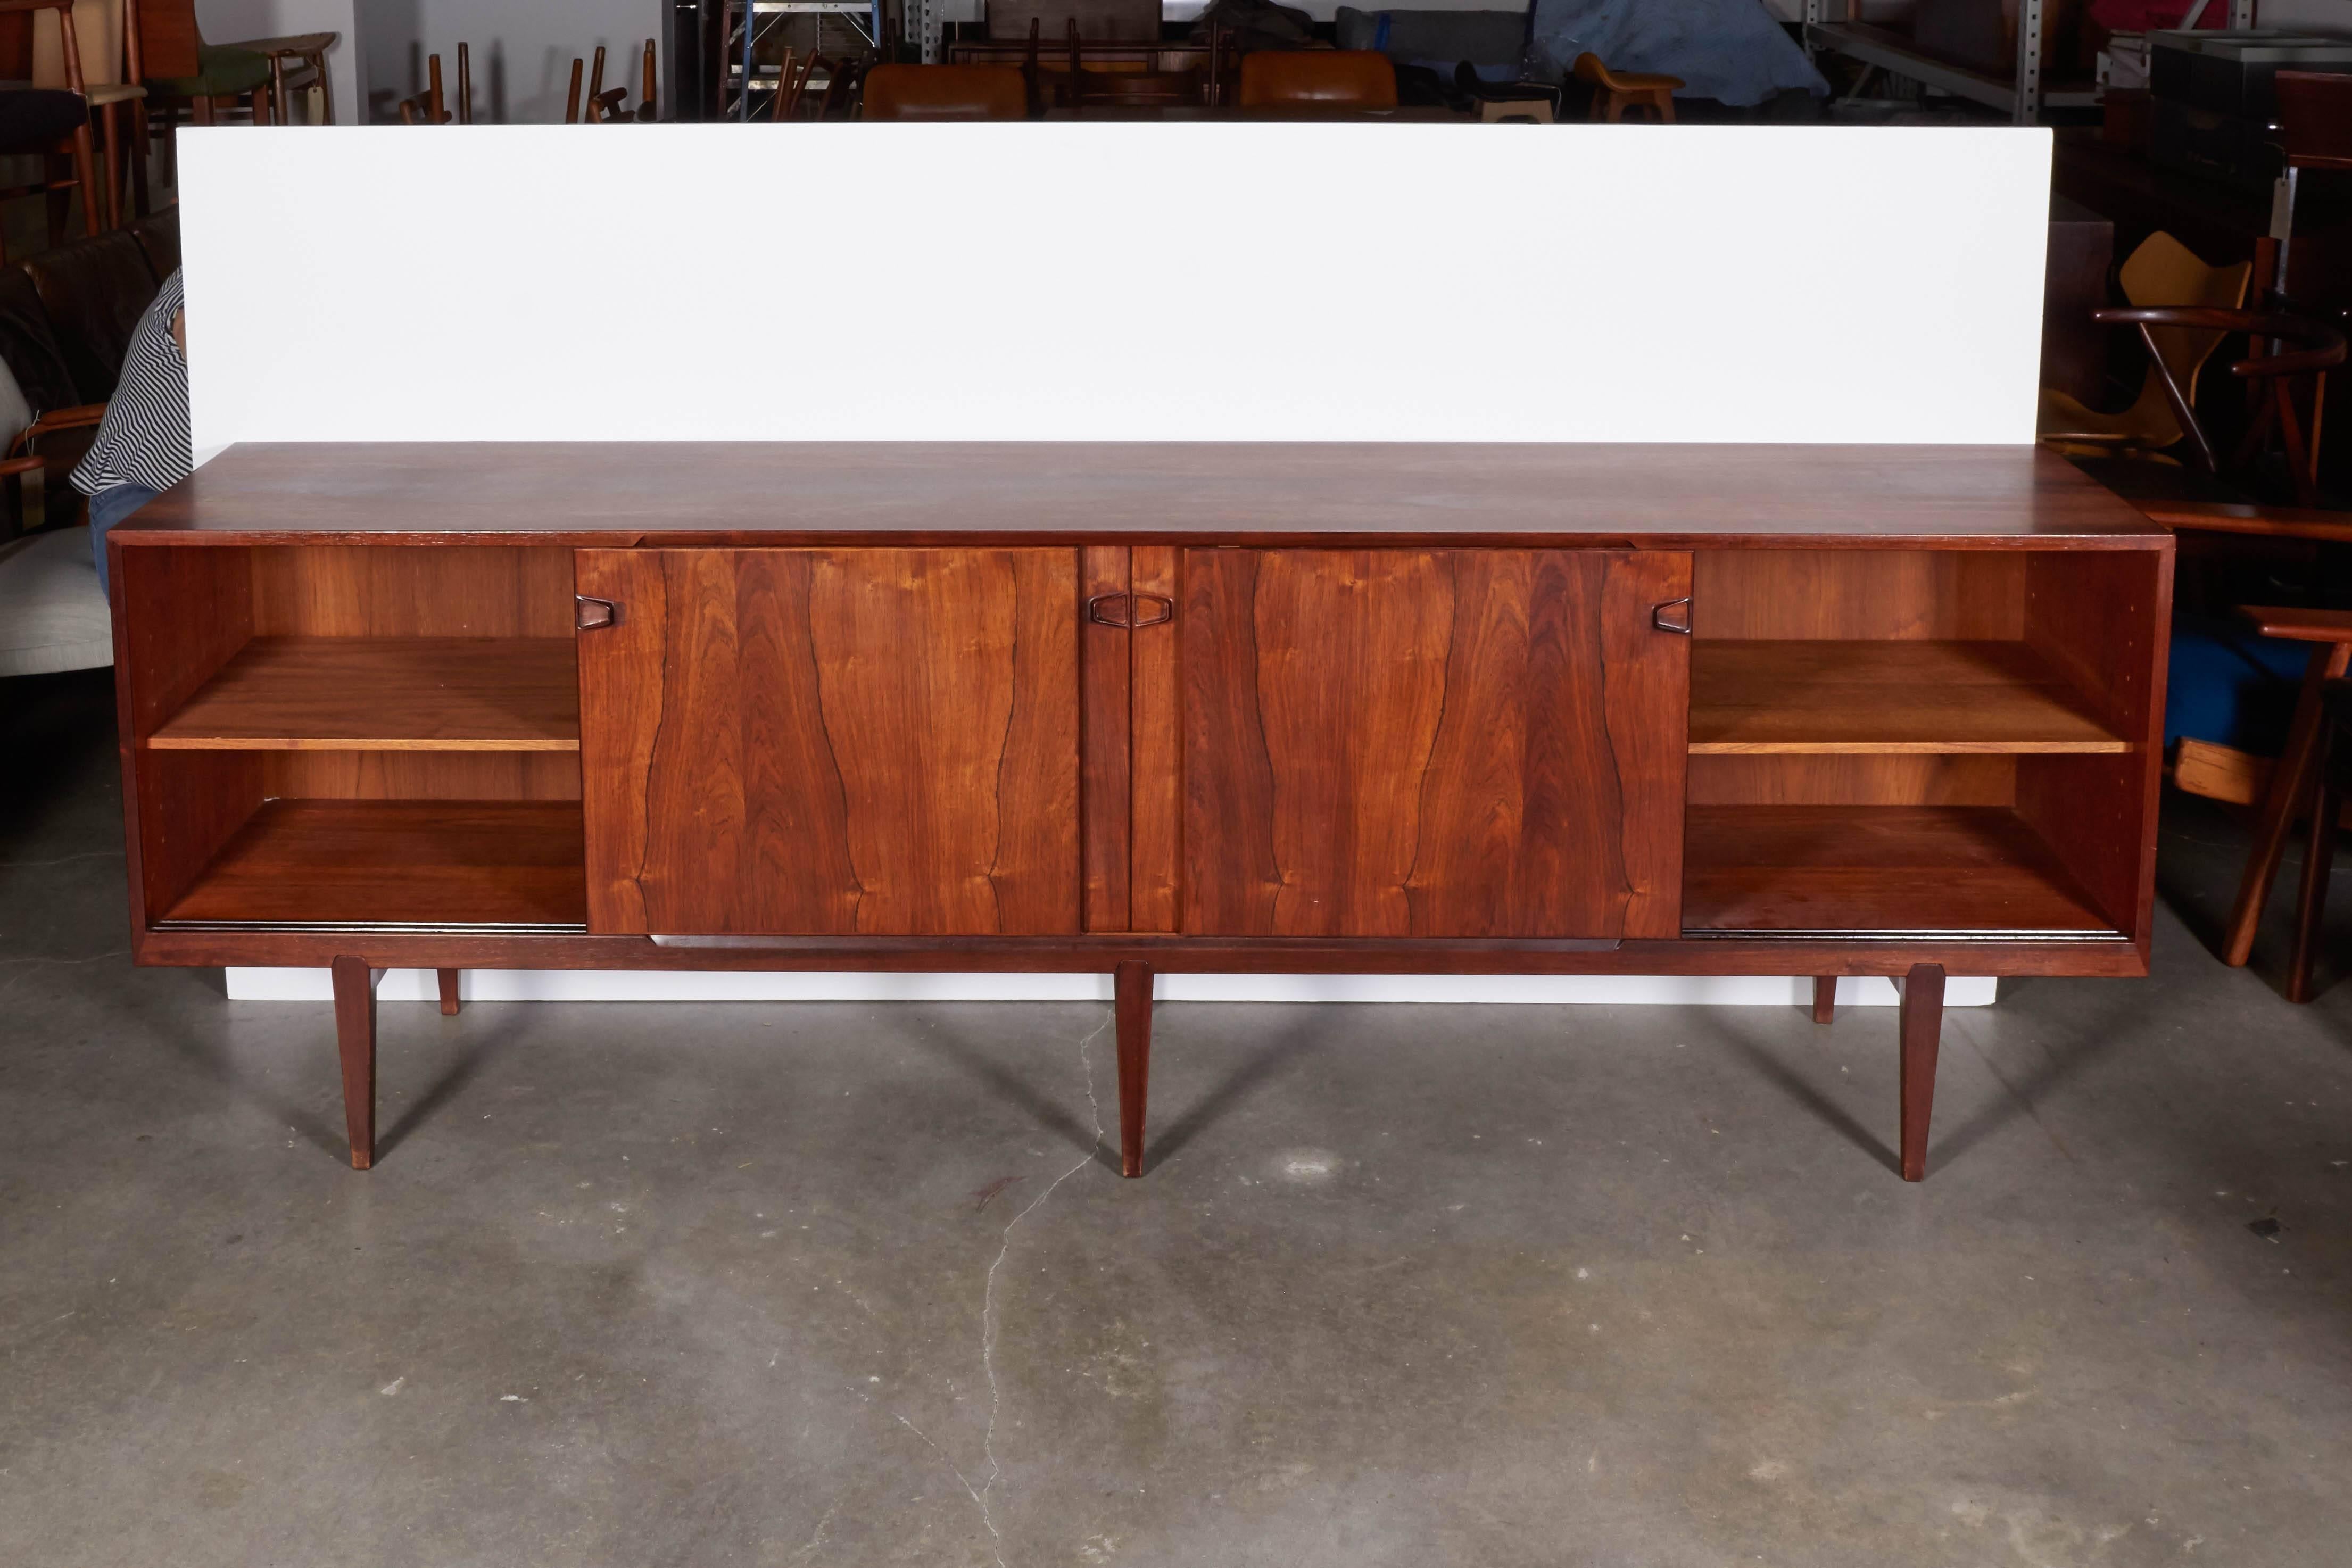 Vintage 1960s Rosengren Hansen Credenza

This extra long sideboar is a finely made 8ft long rosewood sideboard with 6 legs. Can be used in the living room for media storage, the bedroom for clothing storage, or the dining room as a buffet. Ready for